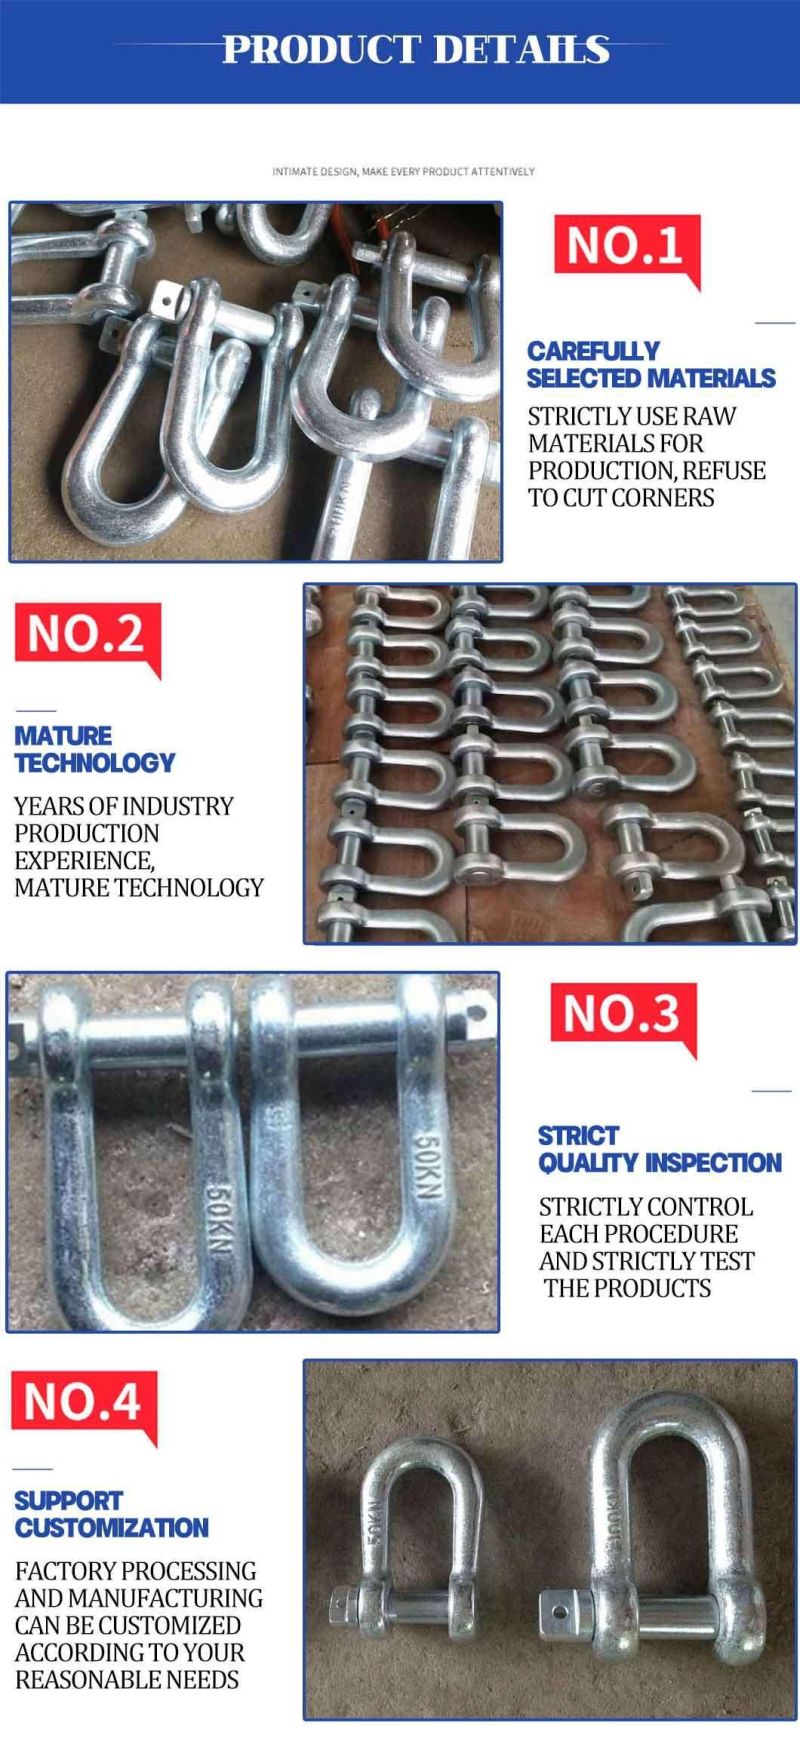 Factory Hardware Rigging Products Factory Forged Steel Marine Rigging Hardware